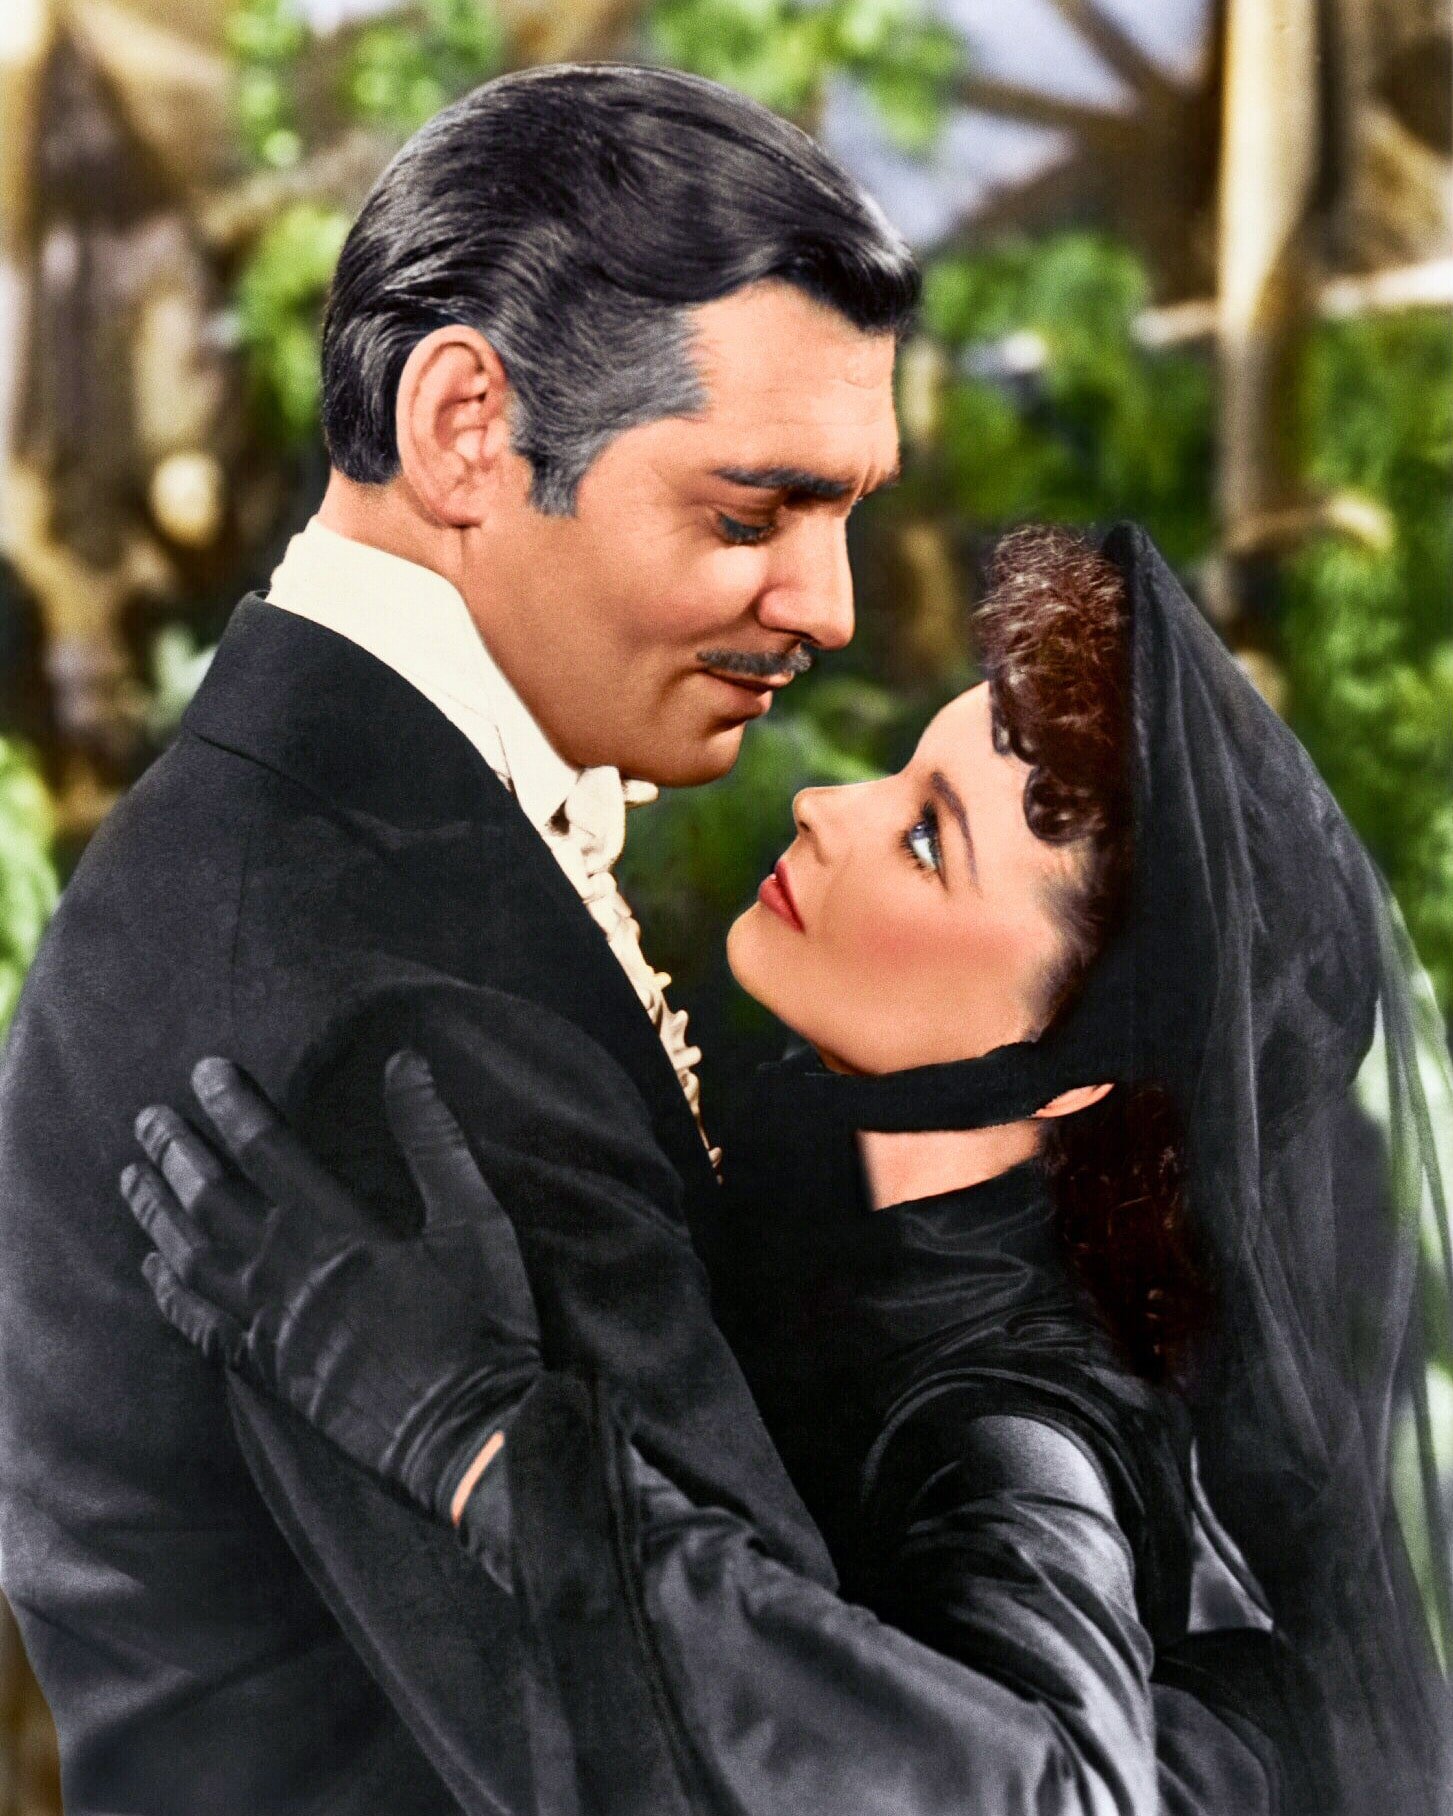 Clark Gable and Vivien Leigh gone with the wind